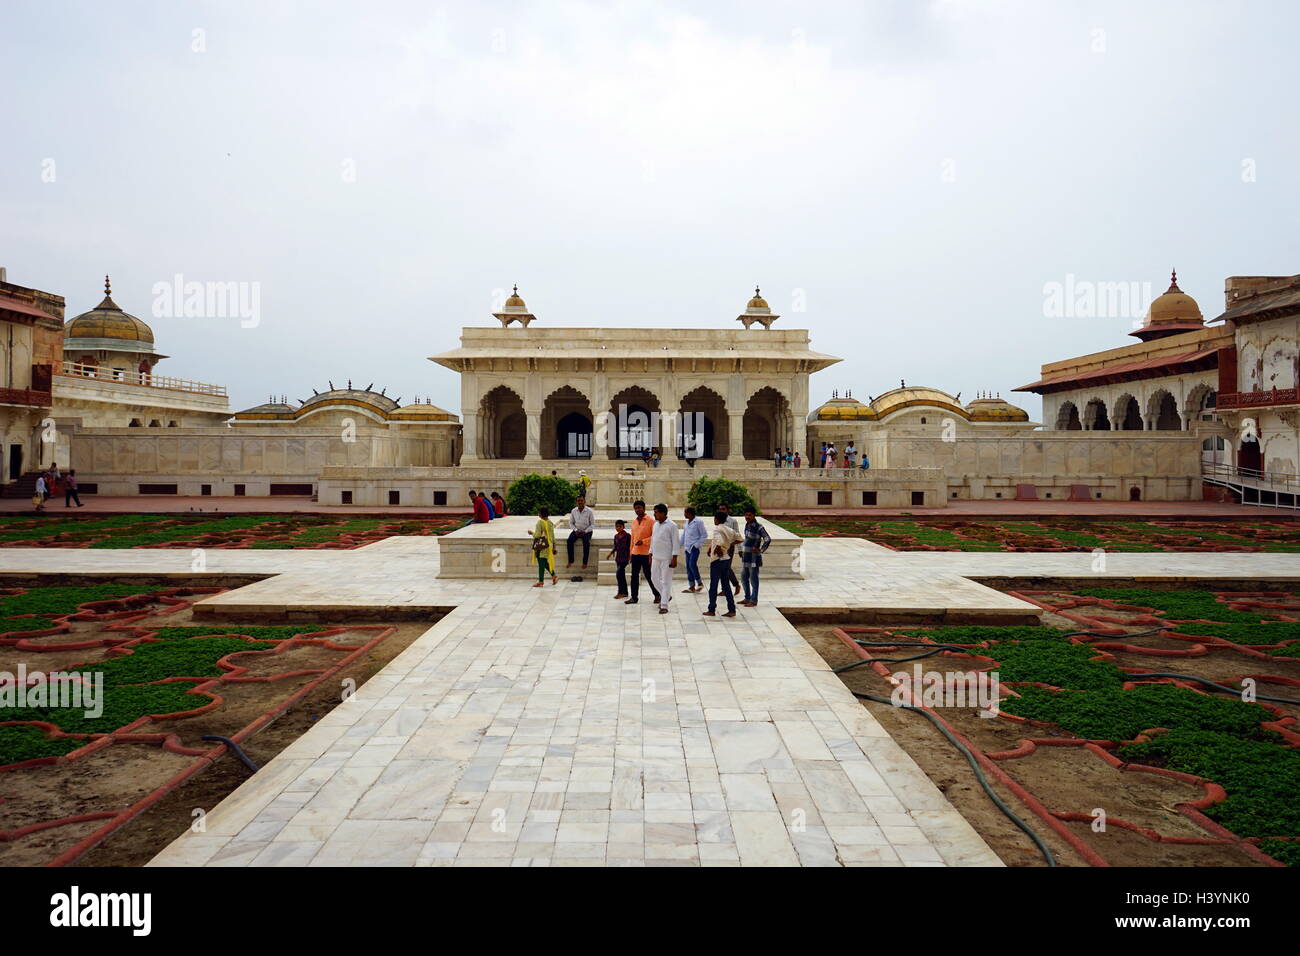 Views of the Agra Fort, the former imperial residence of the Mughal Dynasty, It was used to hold Shah Jahan under house arrest by his son Aurangzeb. Agra, India. Dated 21st Century Stock Photo